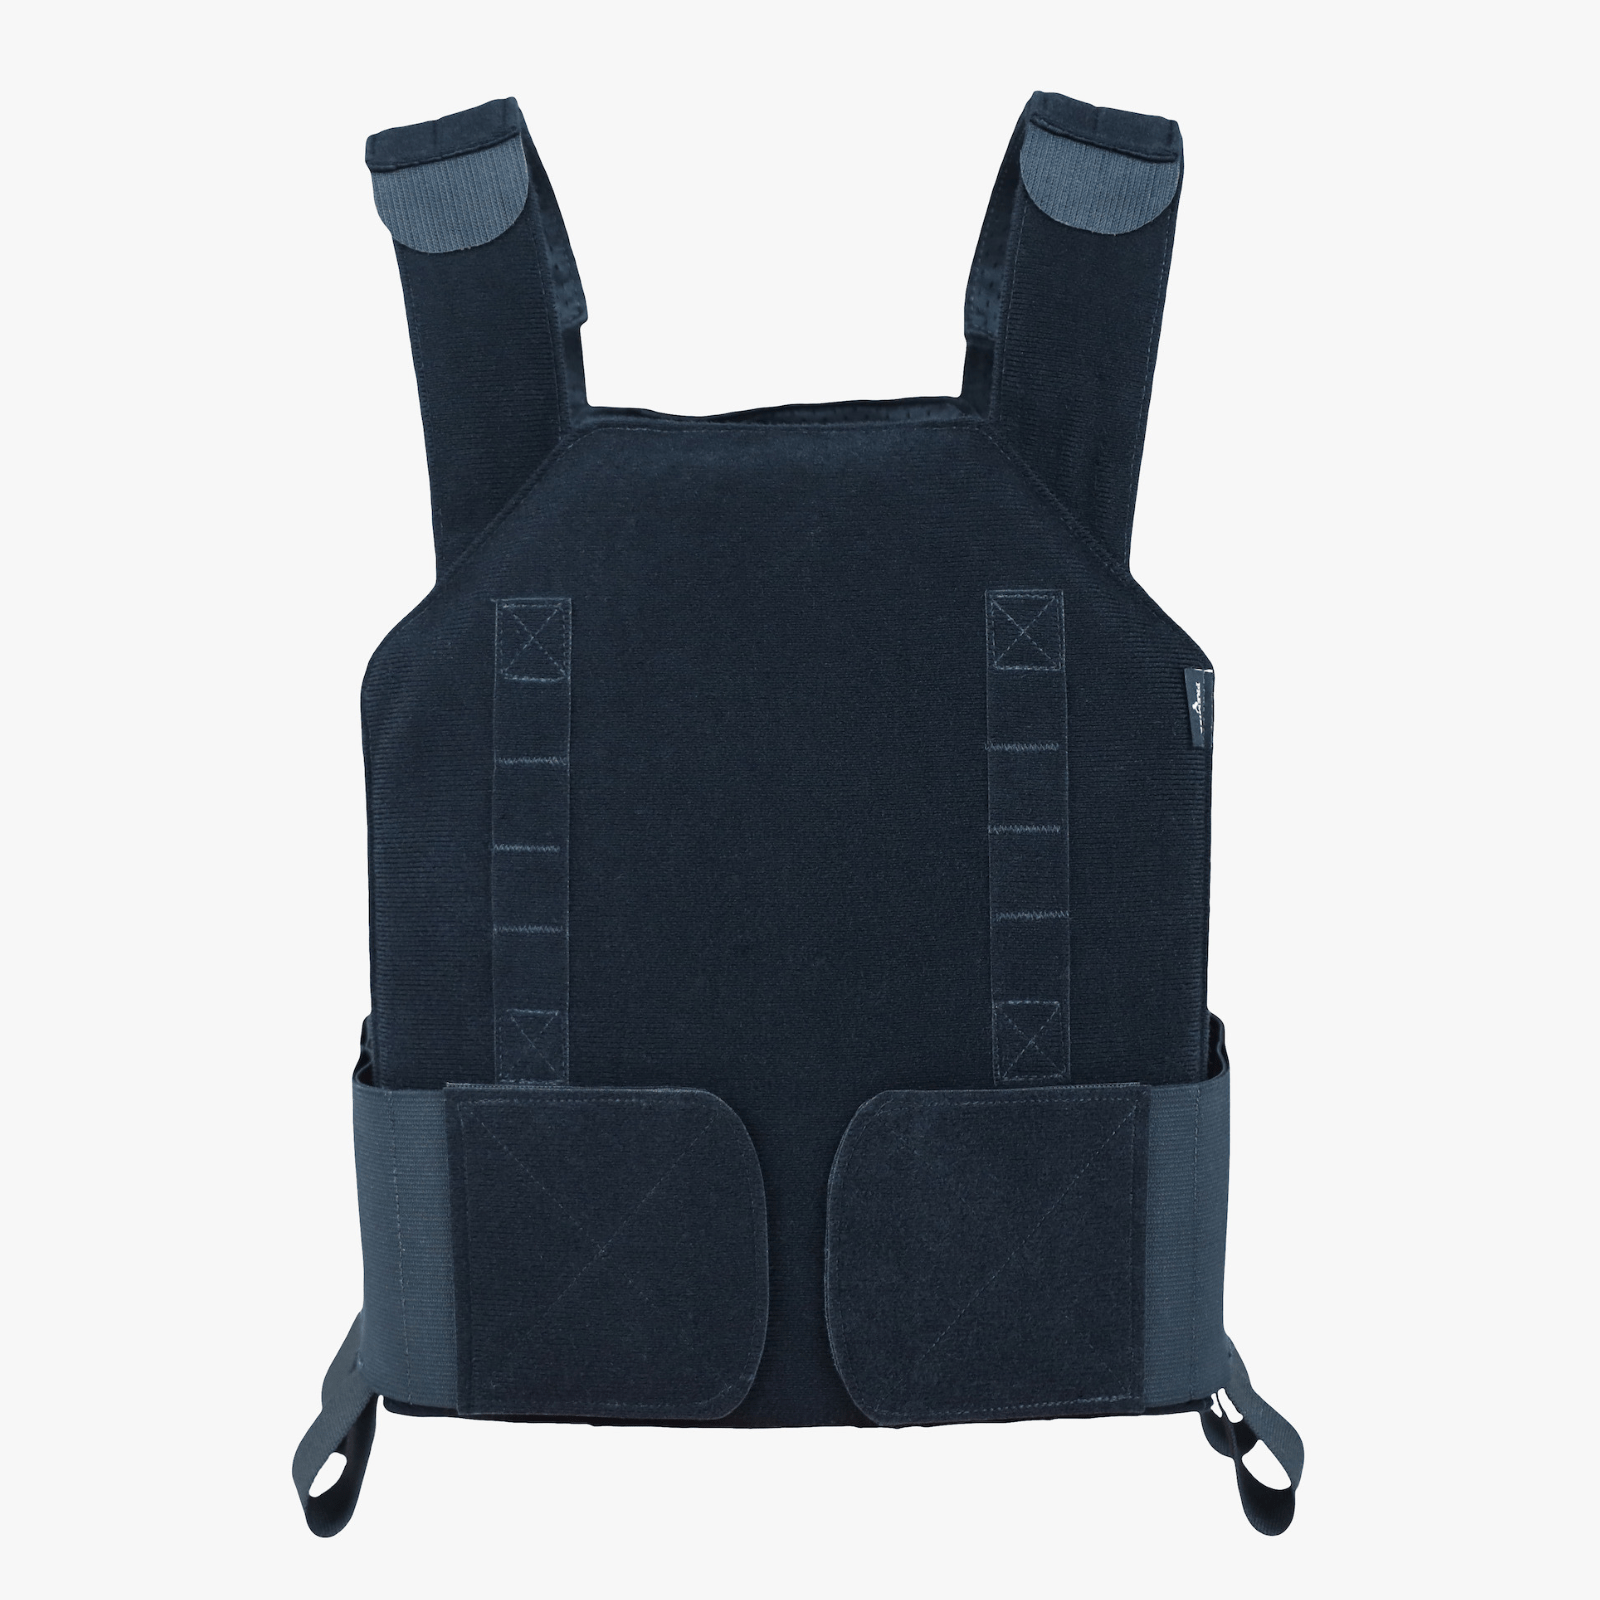 A level 3 or level 4 bulletproof vest. Concealable rifle rated protection. 